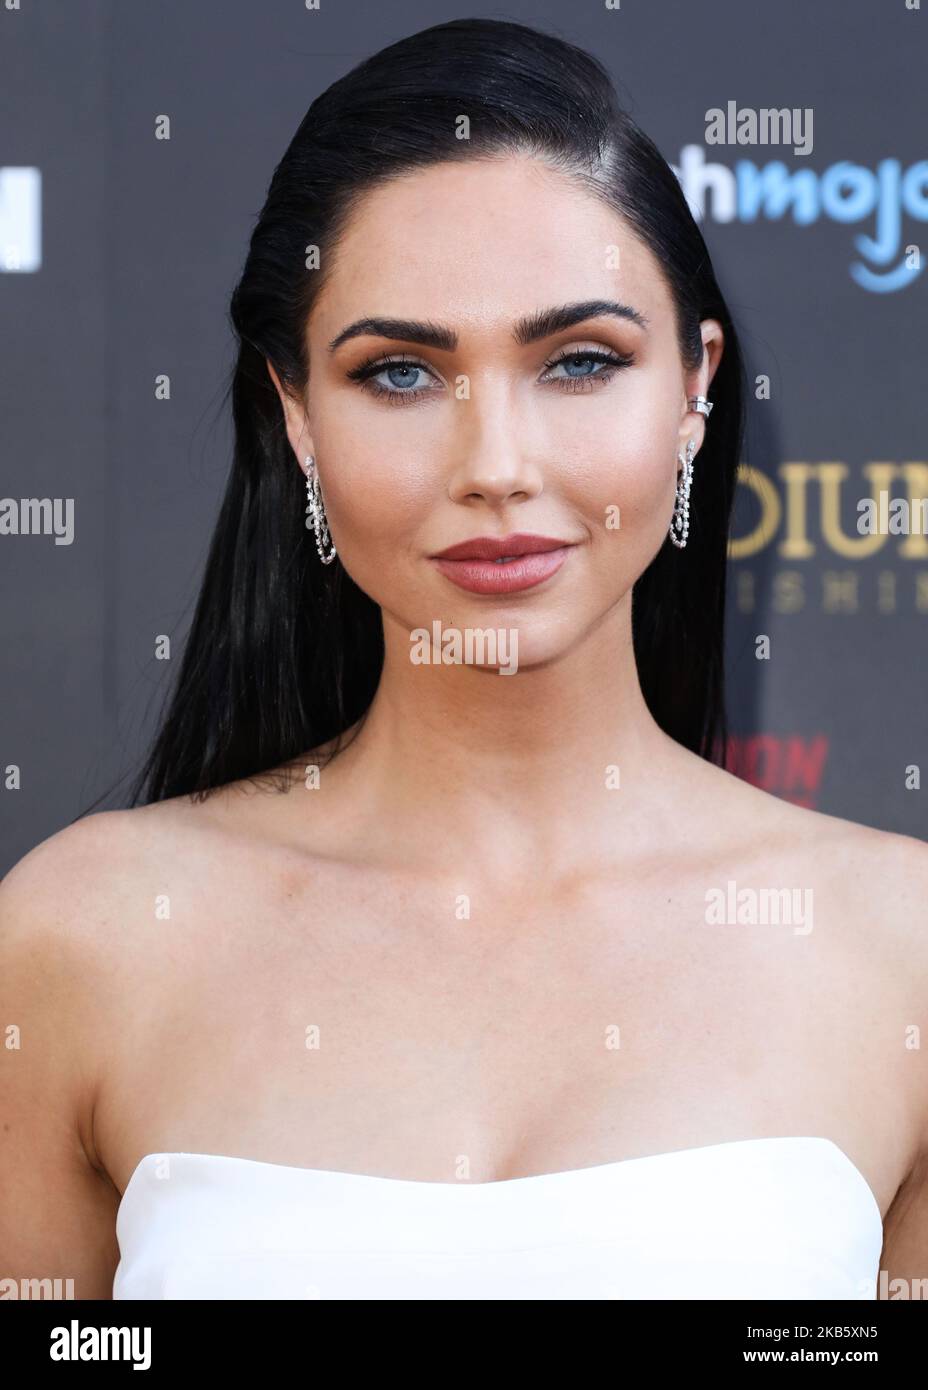 HOLLYWOOD, LOS ANGELES, CALIFORNIA, USA - SEPTEMBER 13: Jessica Green arrives at the 45th Annual Saturn Awards held at Avalon Hollywood on September 13, 2019 in Hollywood, Los Angeles, California, United States. (Photo by David Acosta/Image Press Agency/NurPhoto) Stock Photo